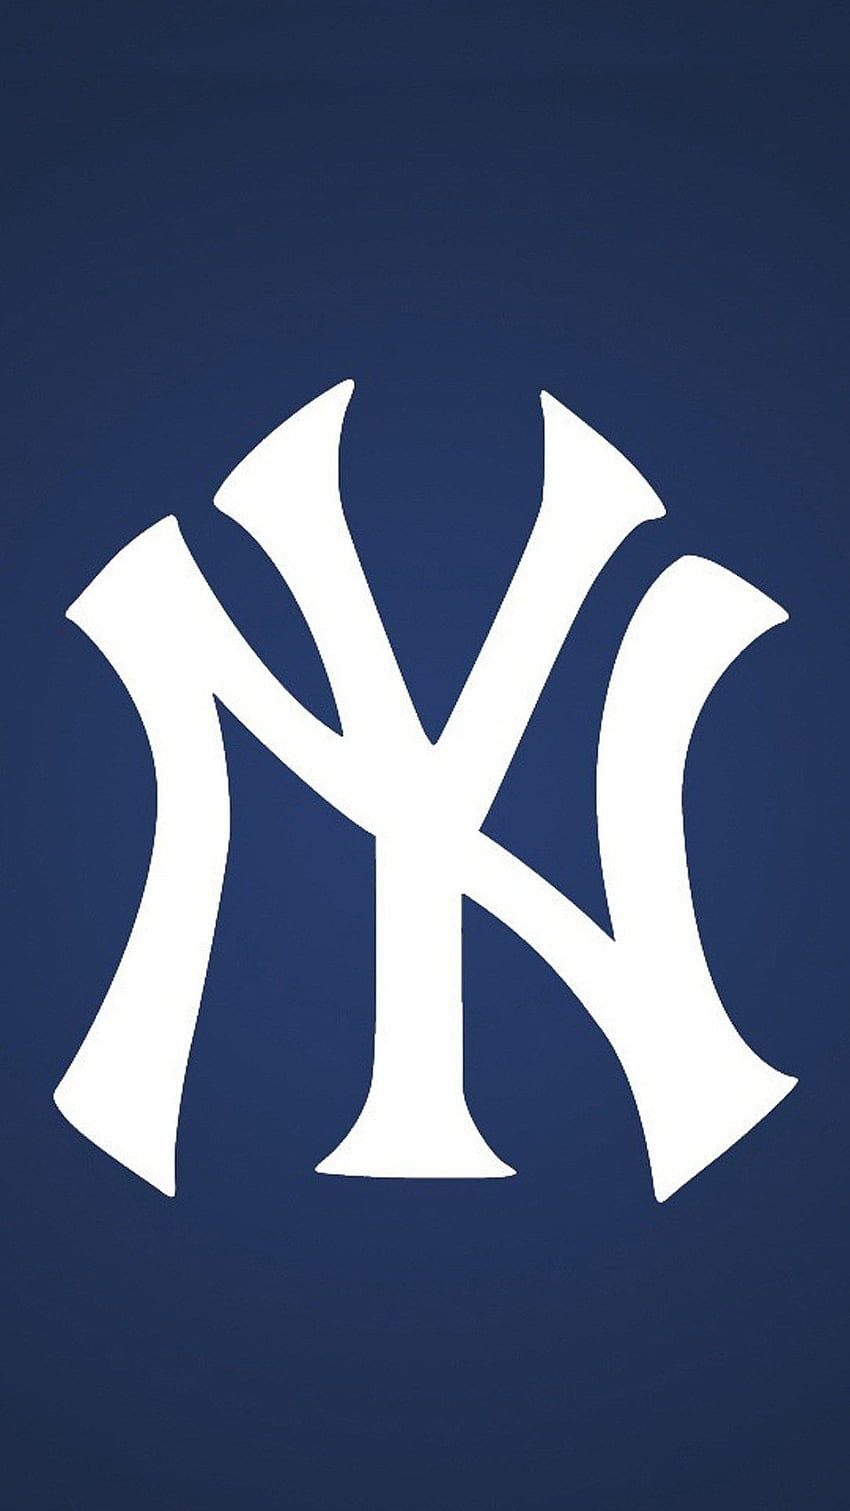 iPhone do New York Yankees - Lindo iPhone do New York Yankees, logotipo do Ny Yankees W. New york yankees, beisebol dos Yankees, logotipo do Ny yankees, legal New York Yankees Papel de parede de celular HD